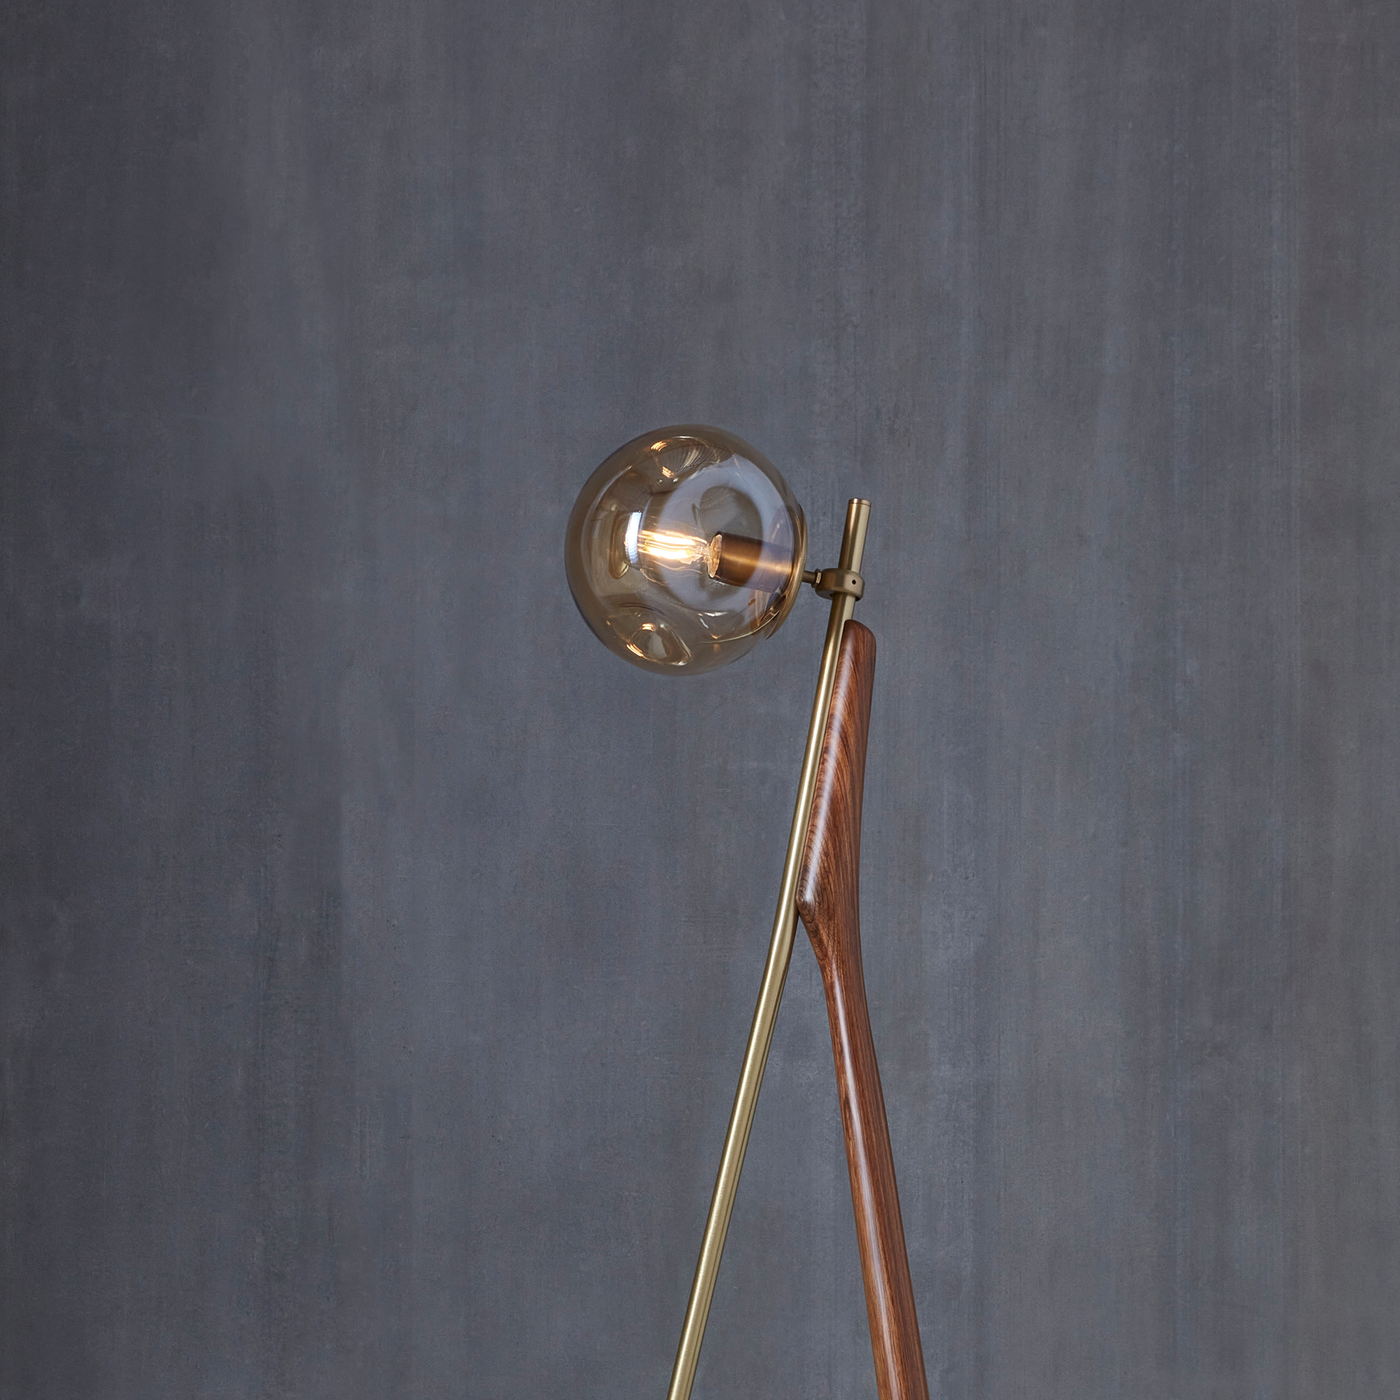 Designer Rukh Floor Lamp by Project 810